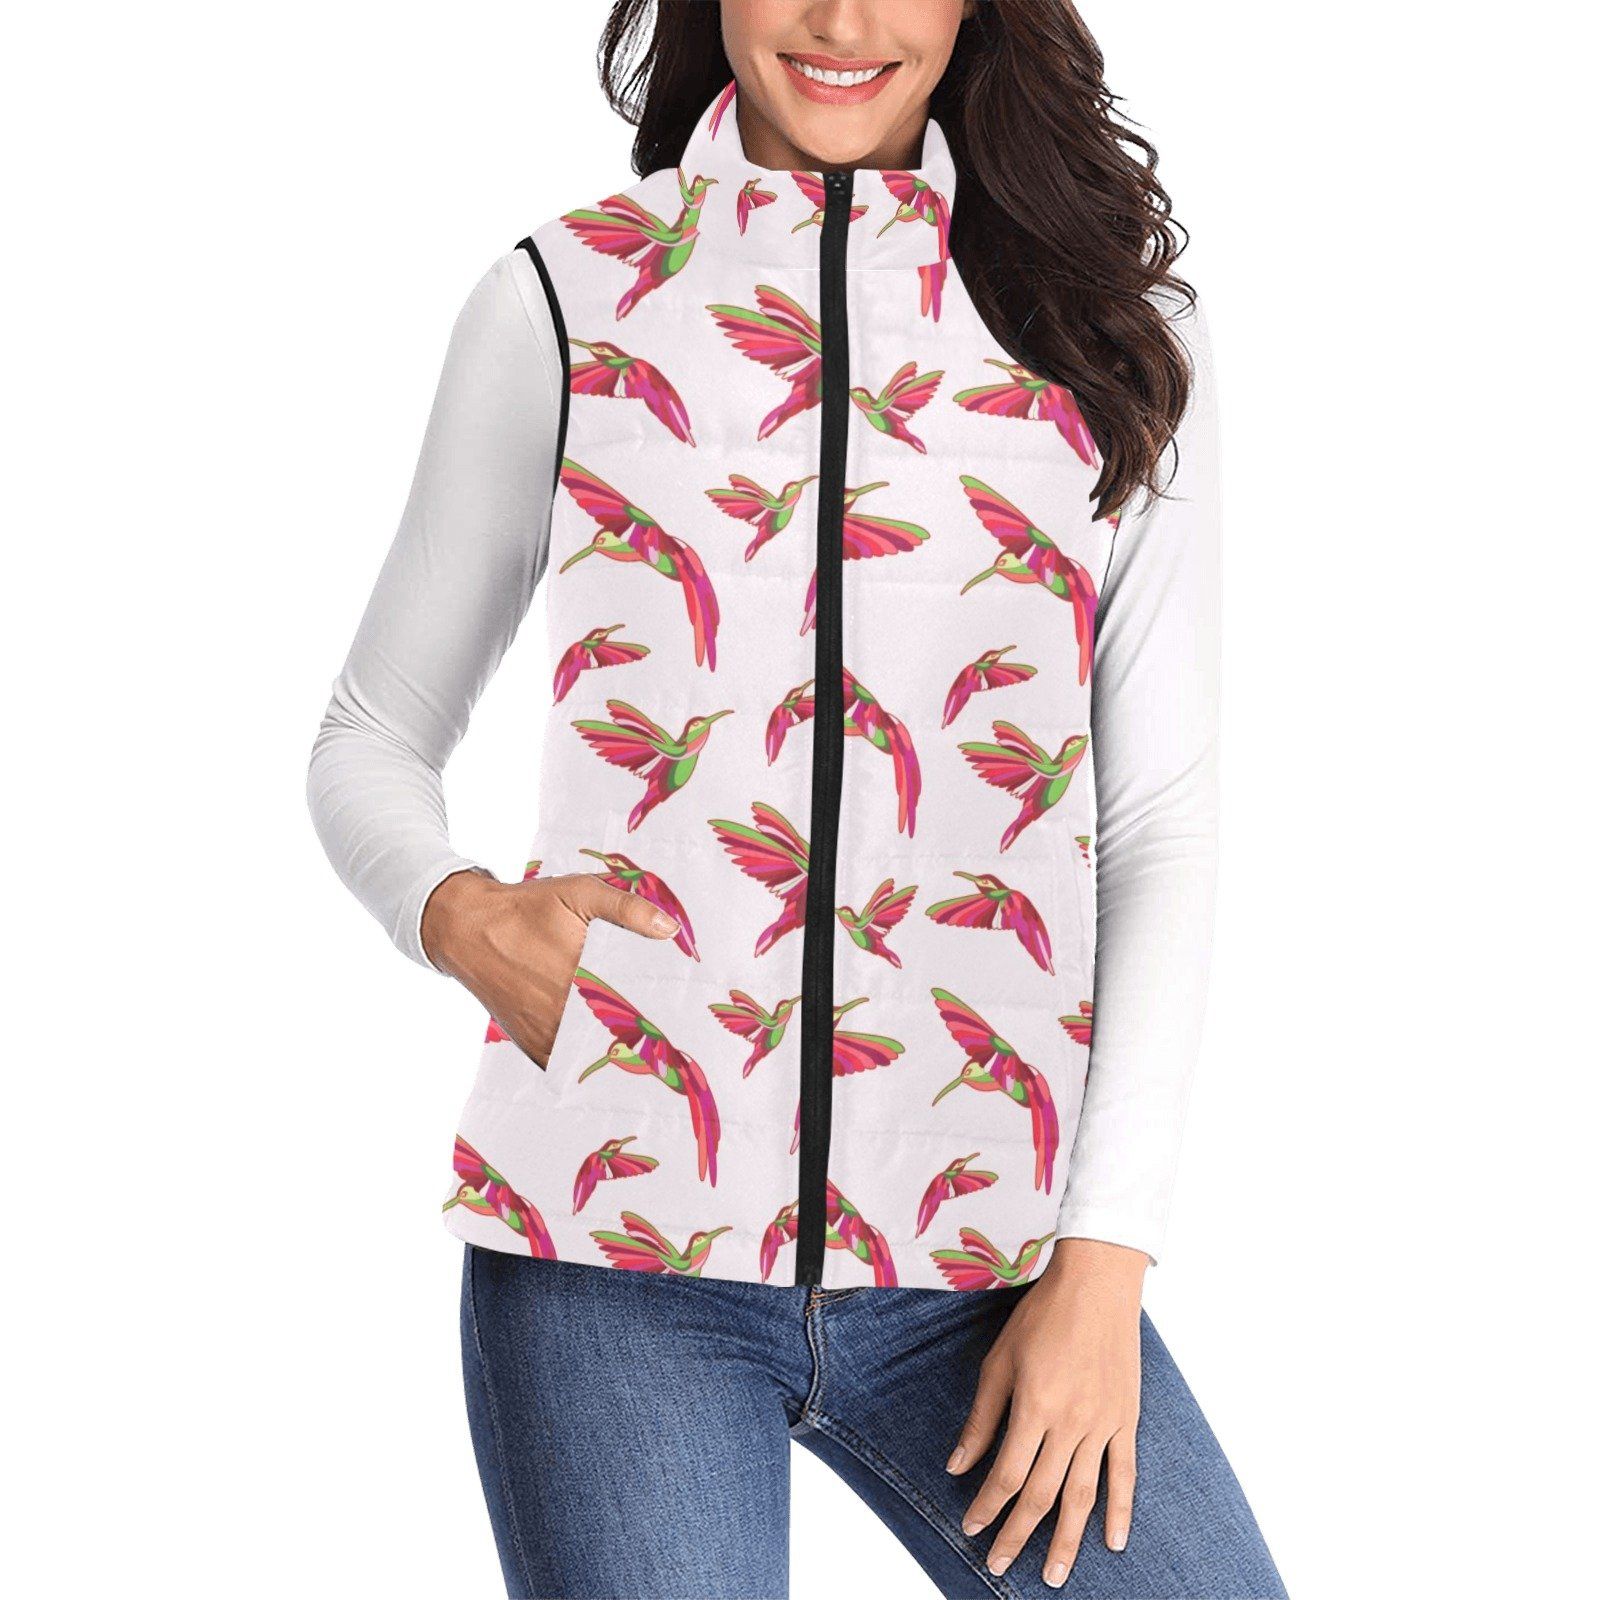 Red Swift Colourful Women's Padded Vest Jacket (Model H44) Women's Padded Vest Jacket (H44) e-joyer 